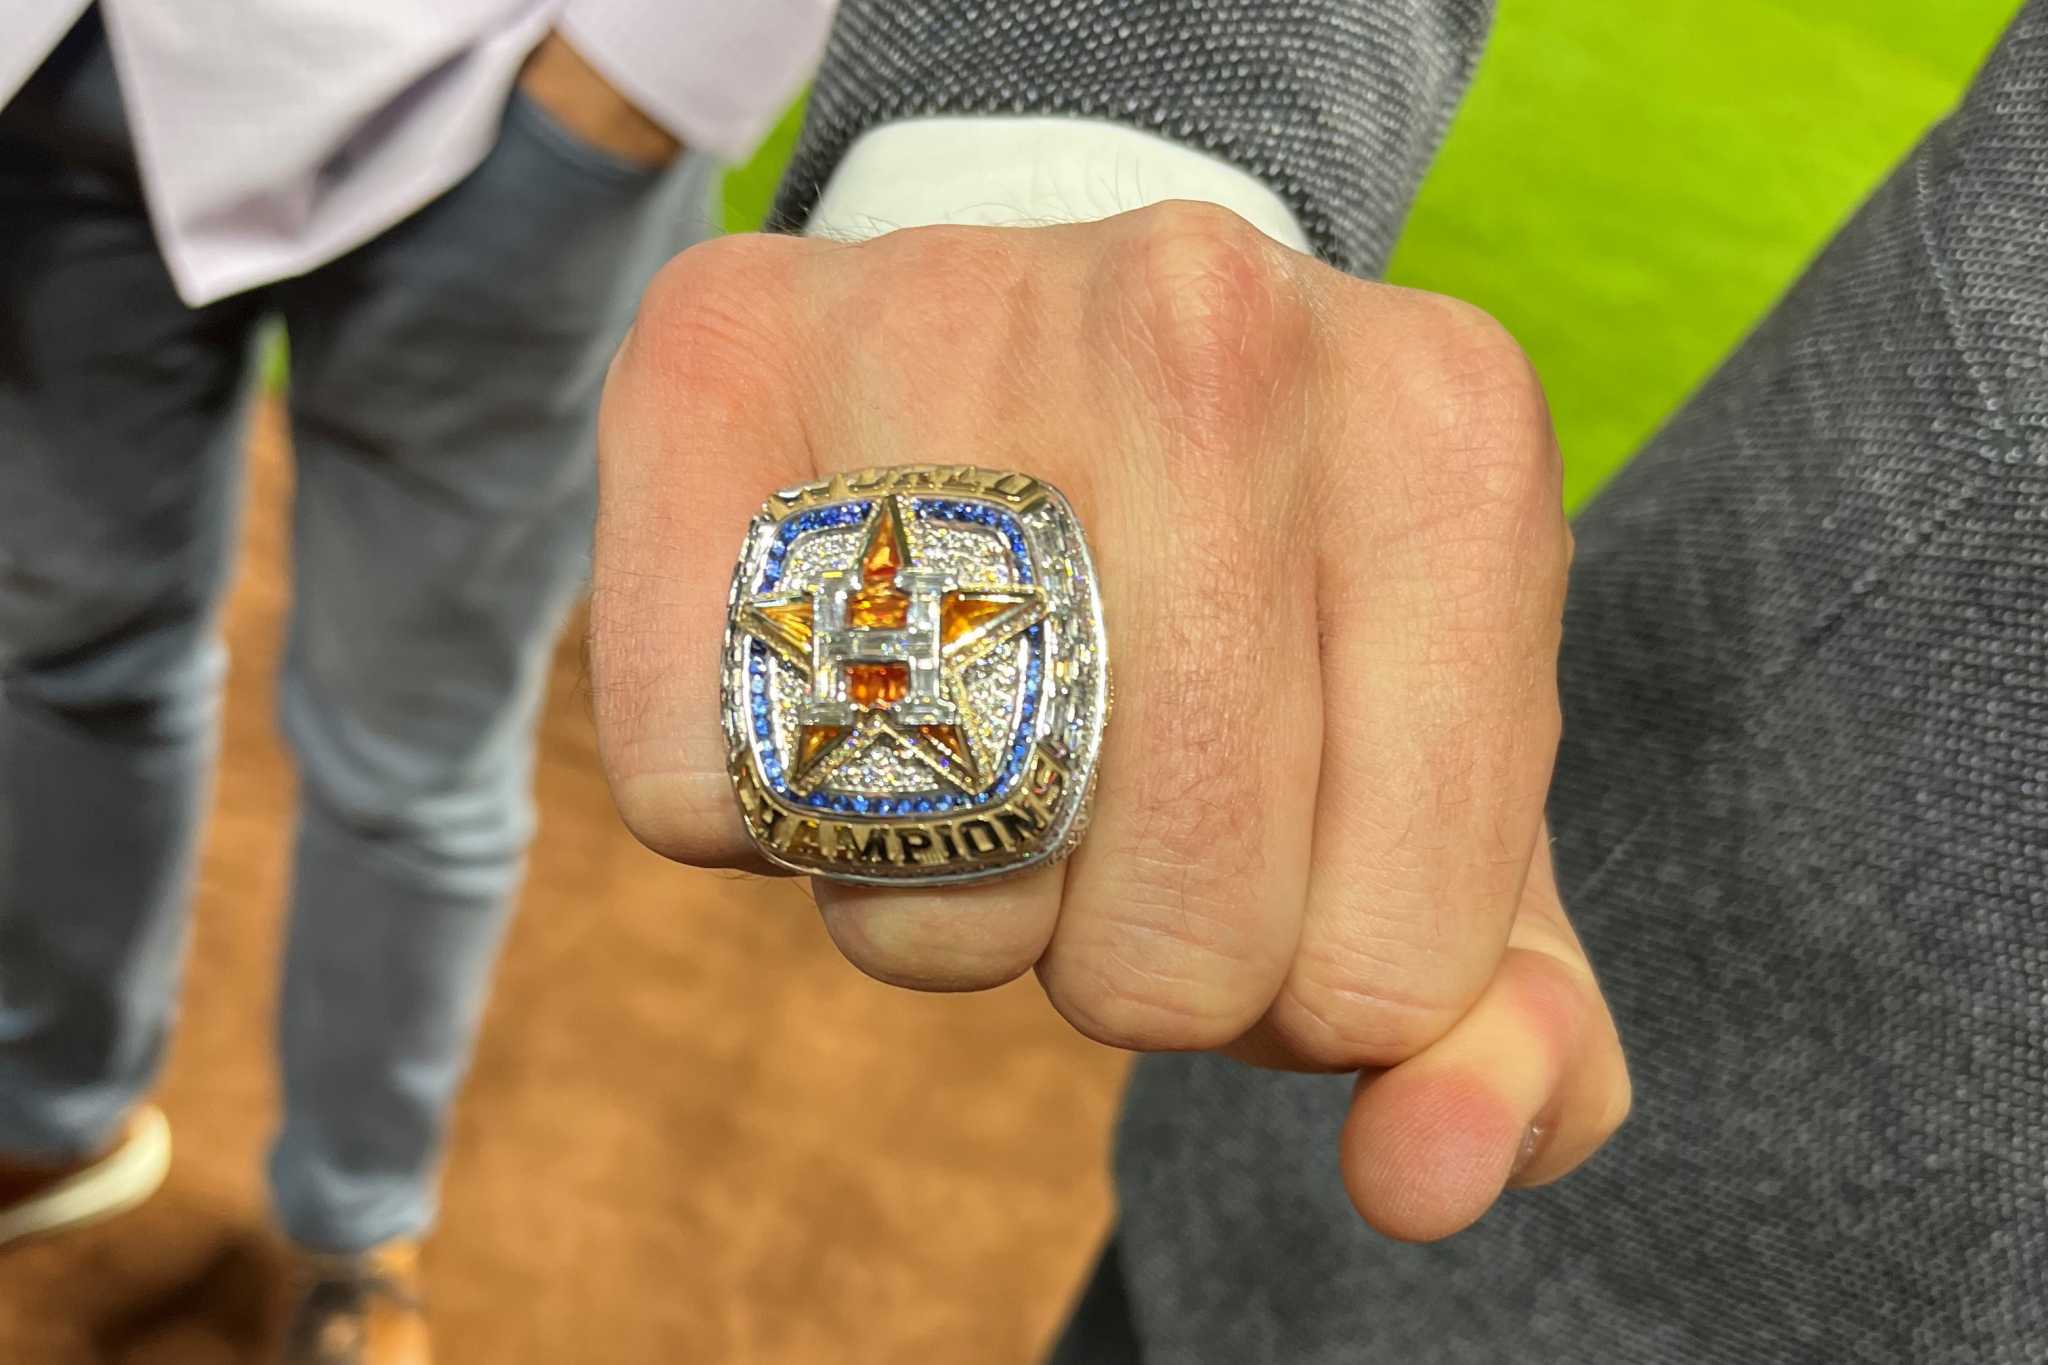 Houston Astros' World Series rings could be the most valuable in